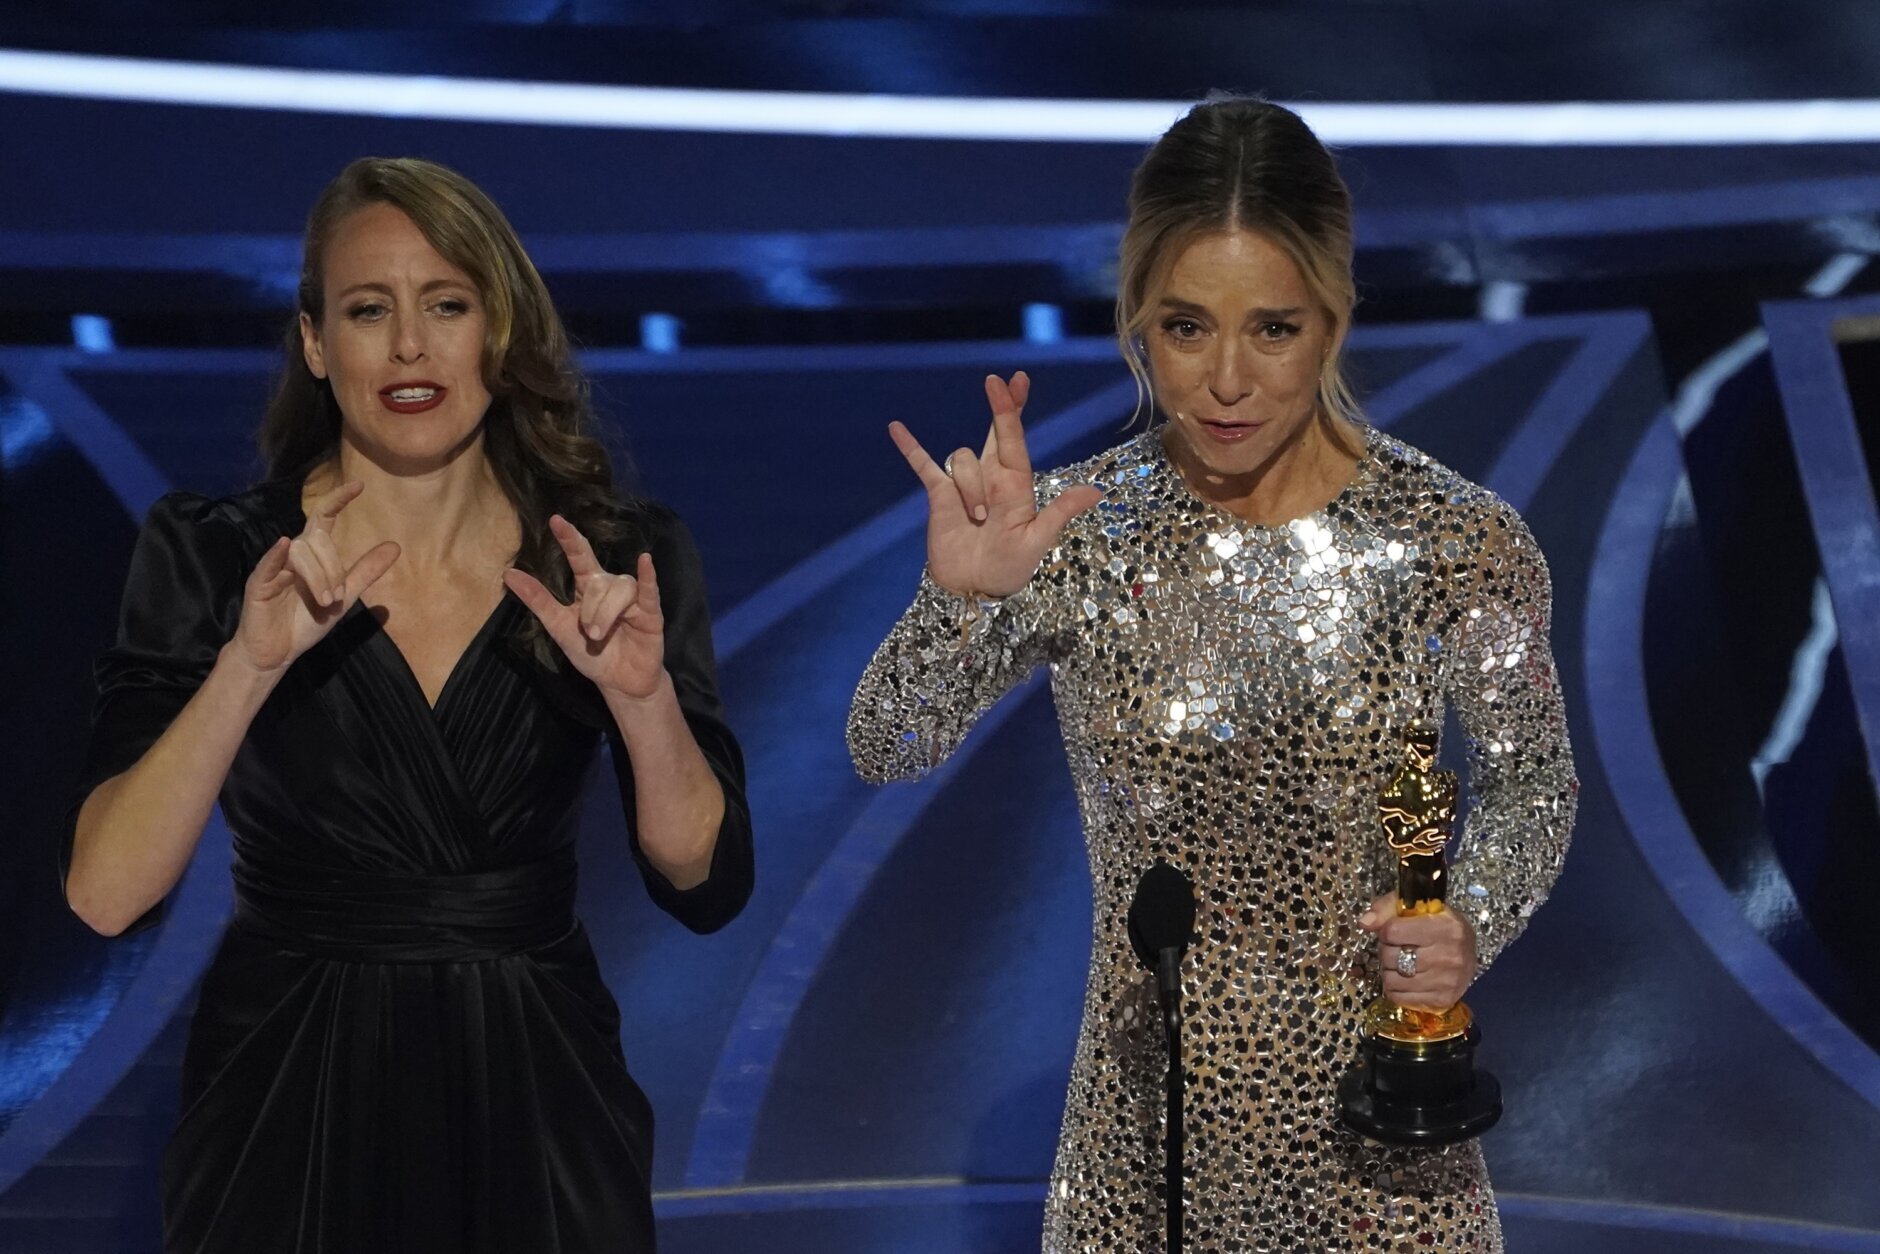 Sian Heder, right, signs "I really love you" as she accepts the award for best adapted screenplay for "CODA" at the Oscars on Sunday, March 27, 2022, at the Dolby Theatre in Los Angeles. (AP Photo/Chris Pizzello)